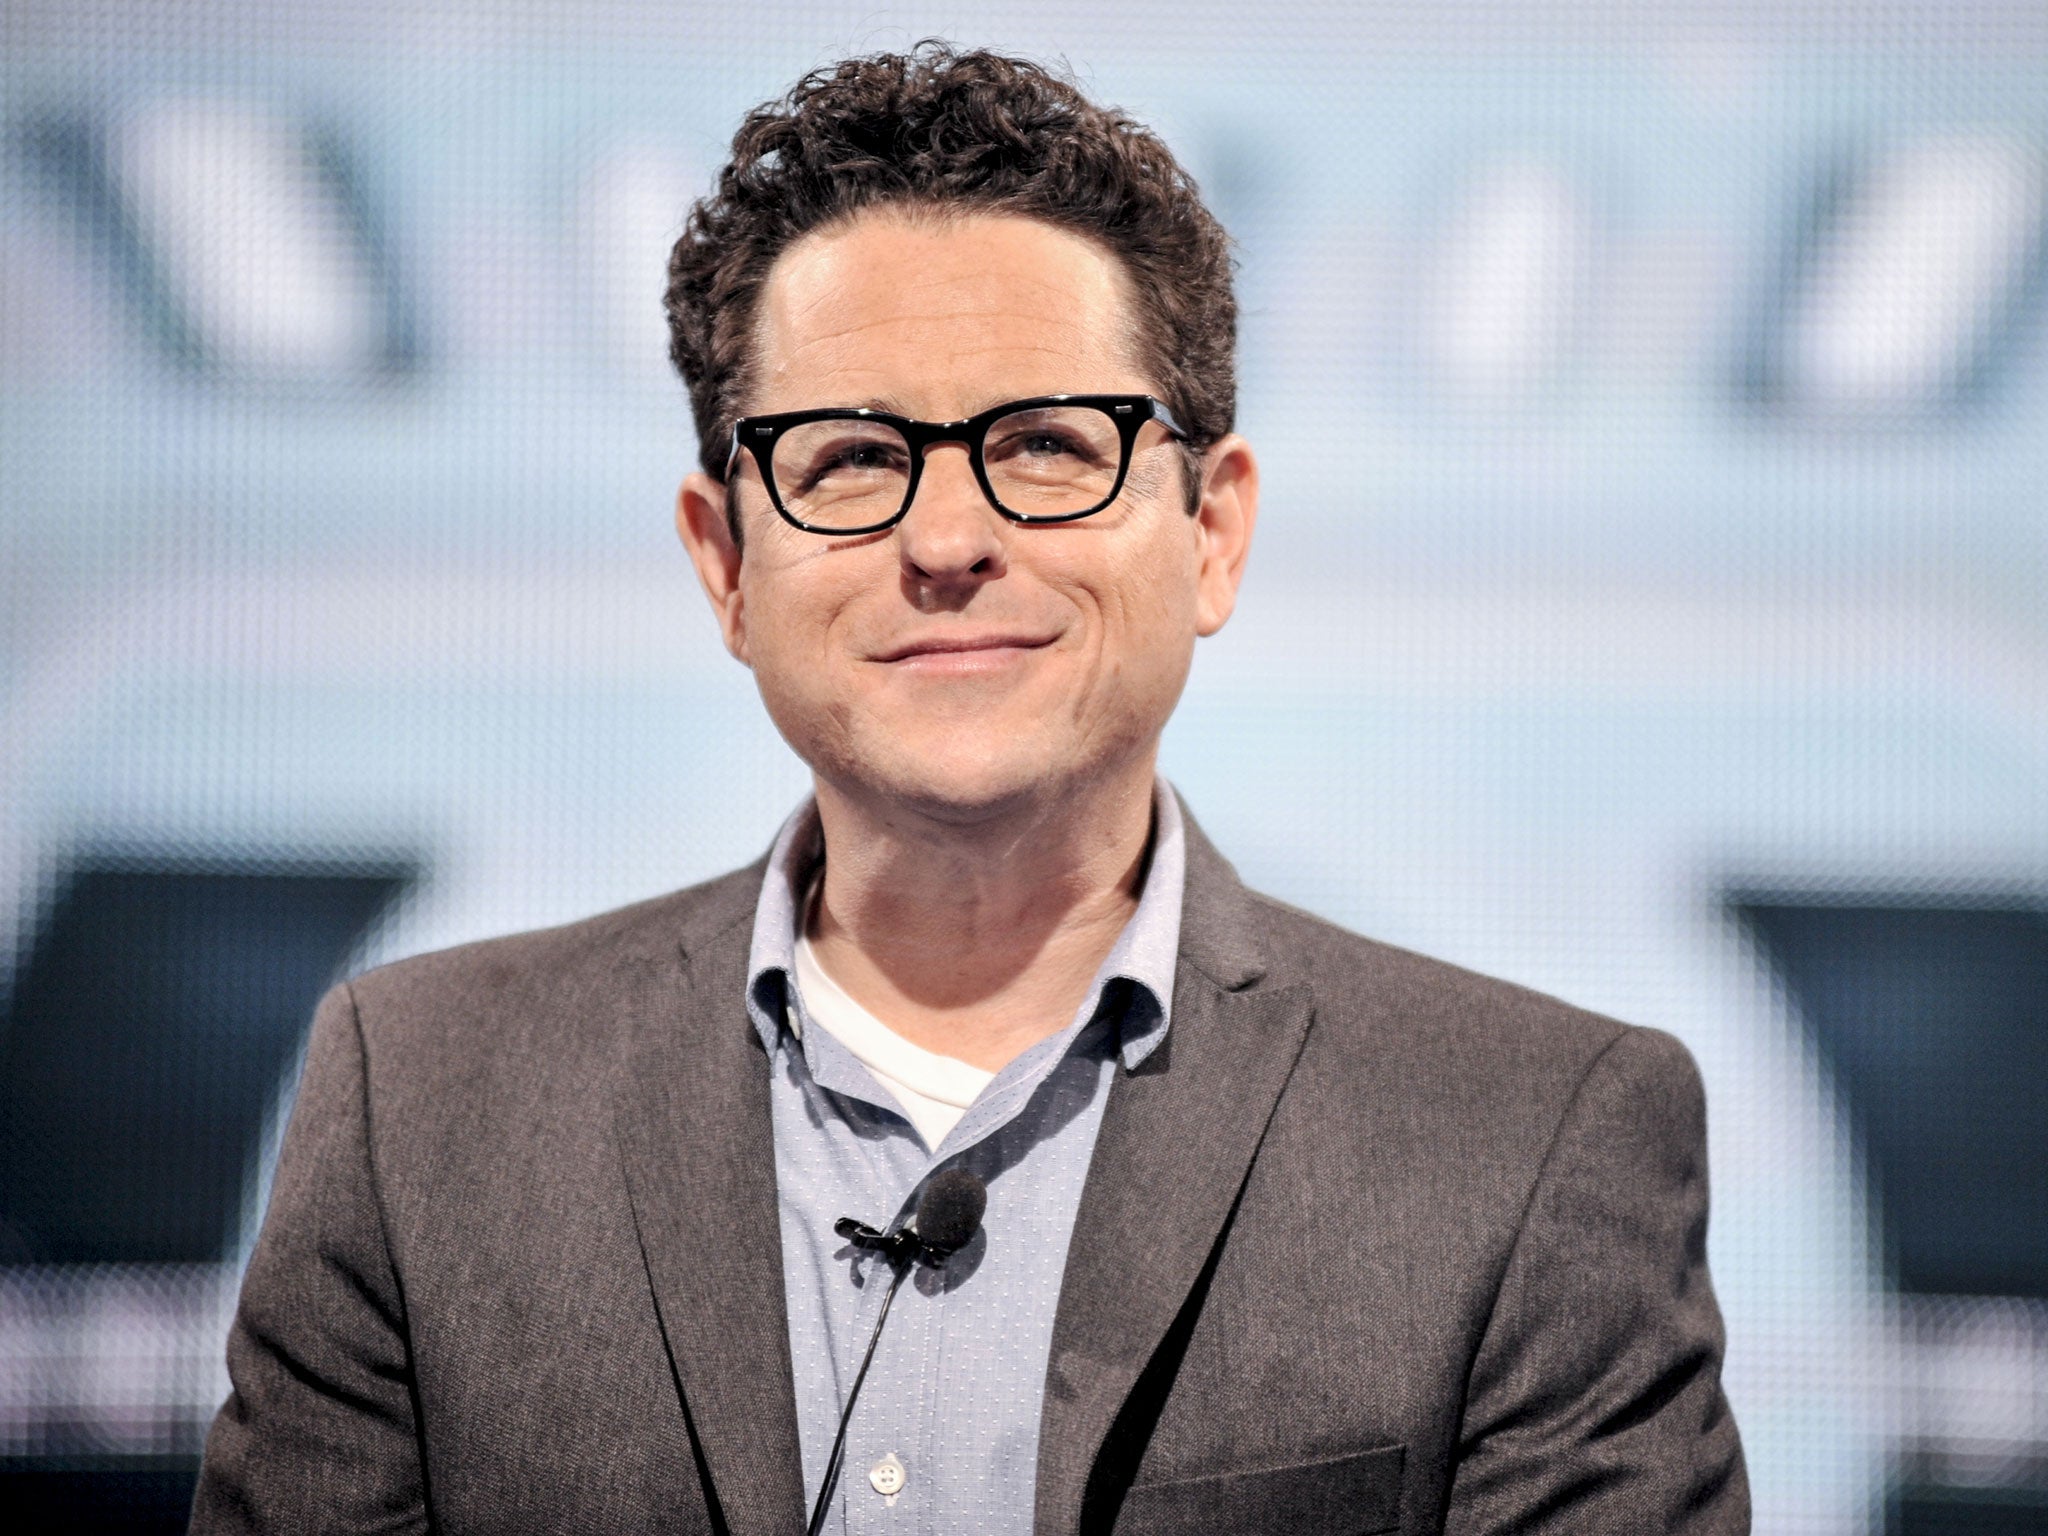 Star Wars: Episode VII, directed by JJ Abrams, will be released in December 2015